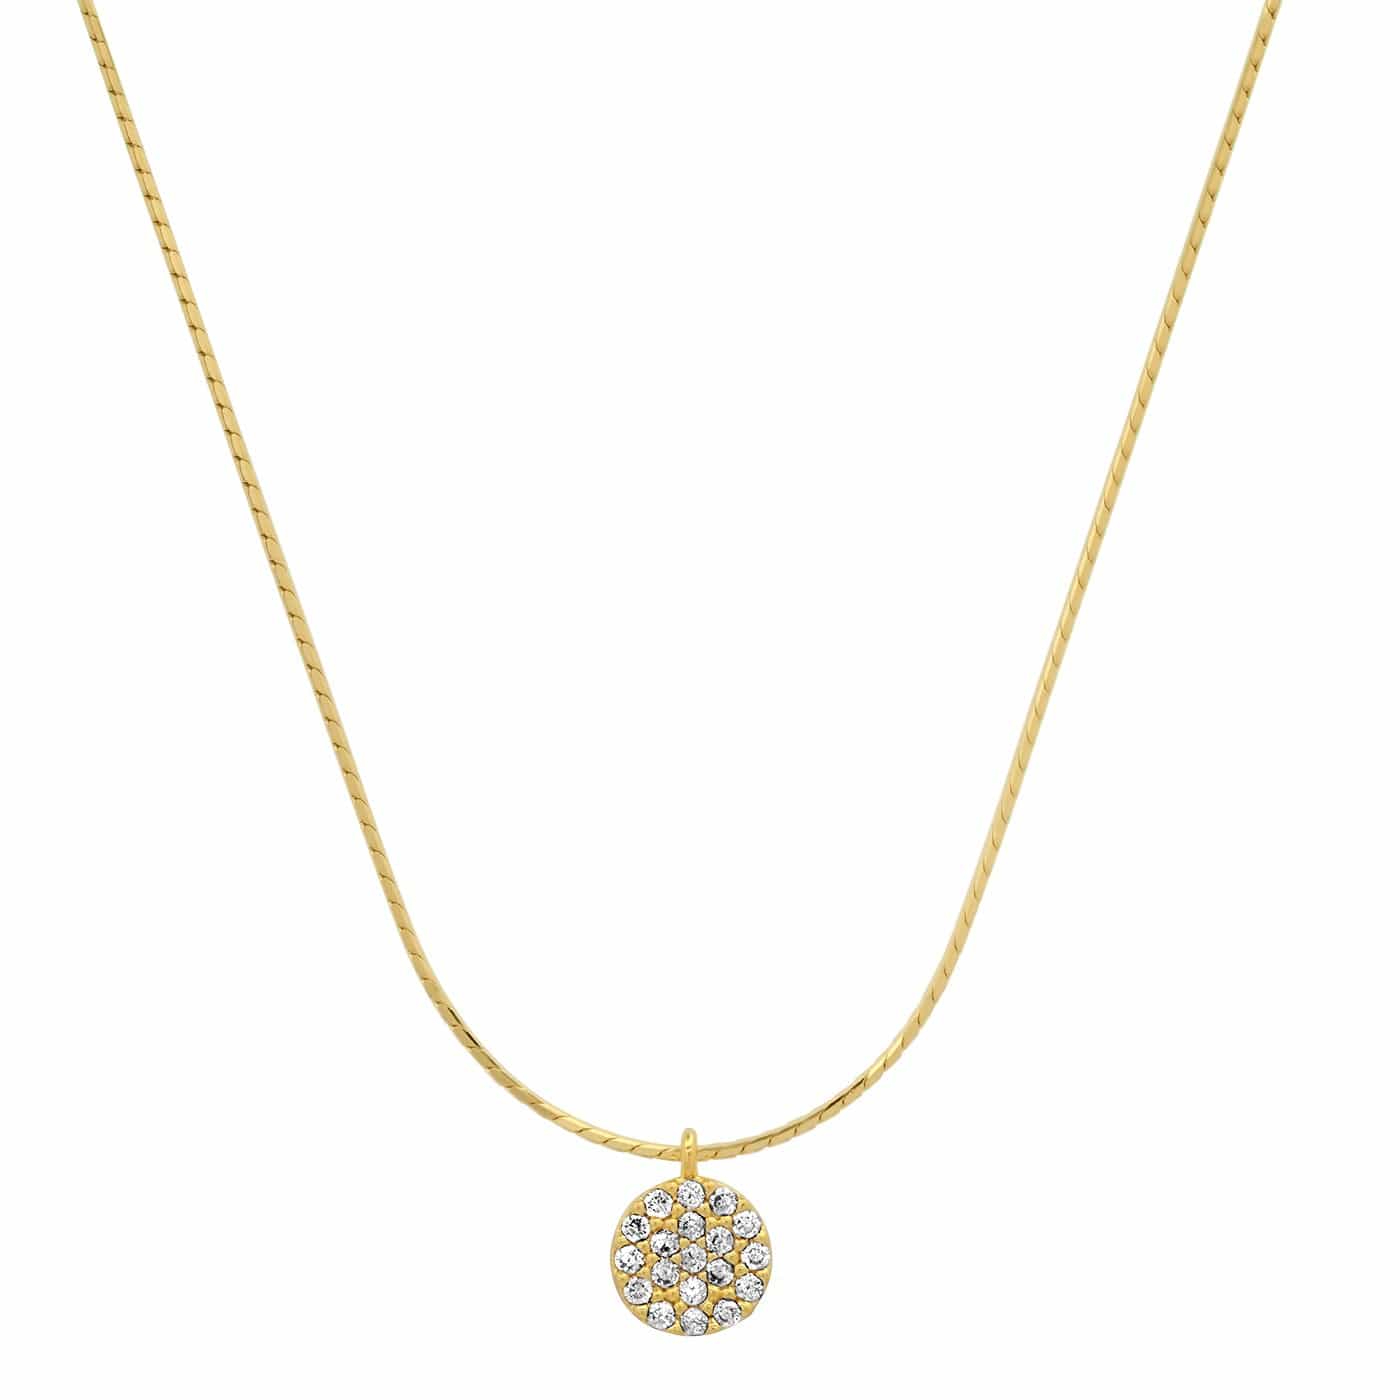 TAI JEWELRY Necklace Gold Vermeil Snake Chain with Pave CZ Disc